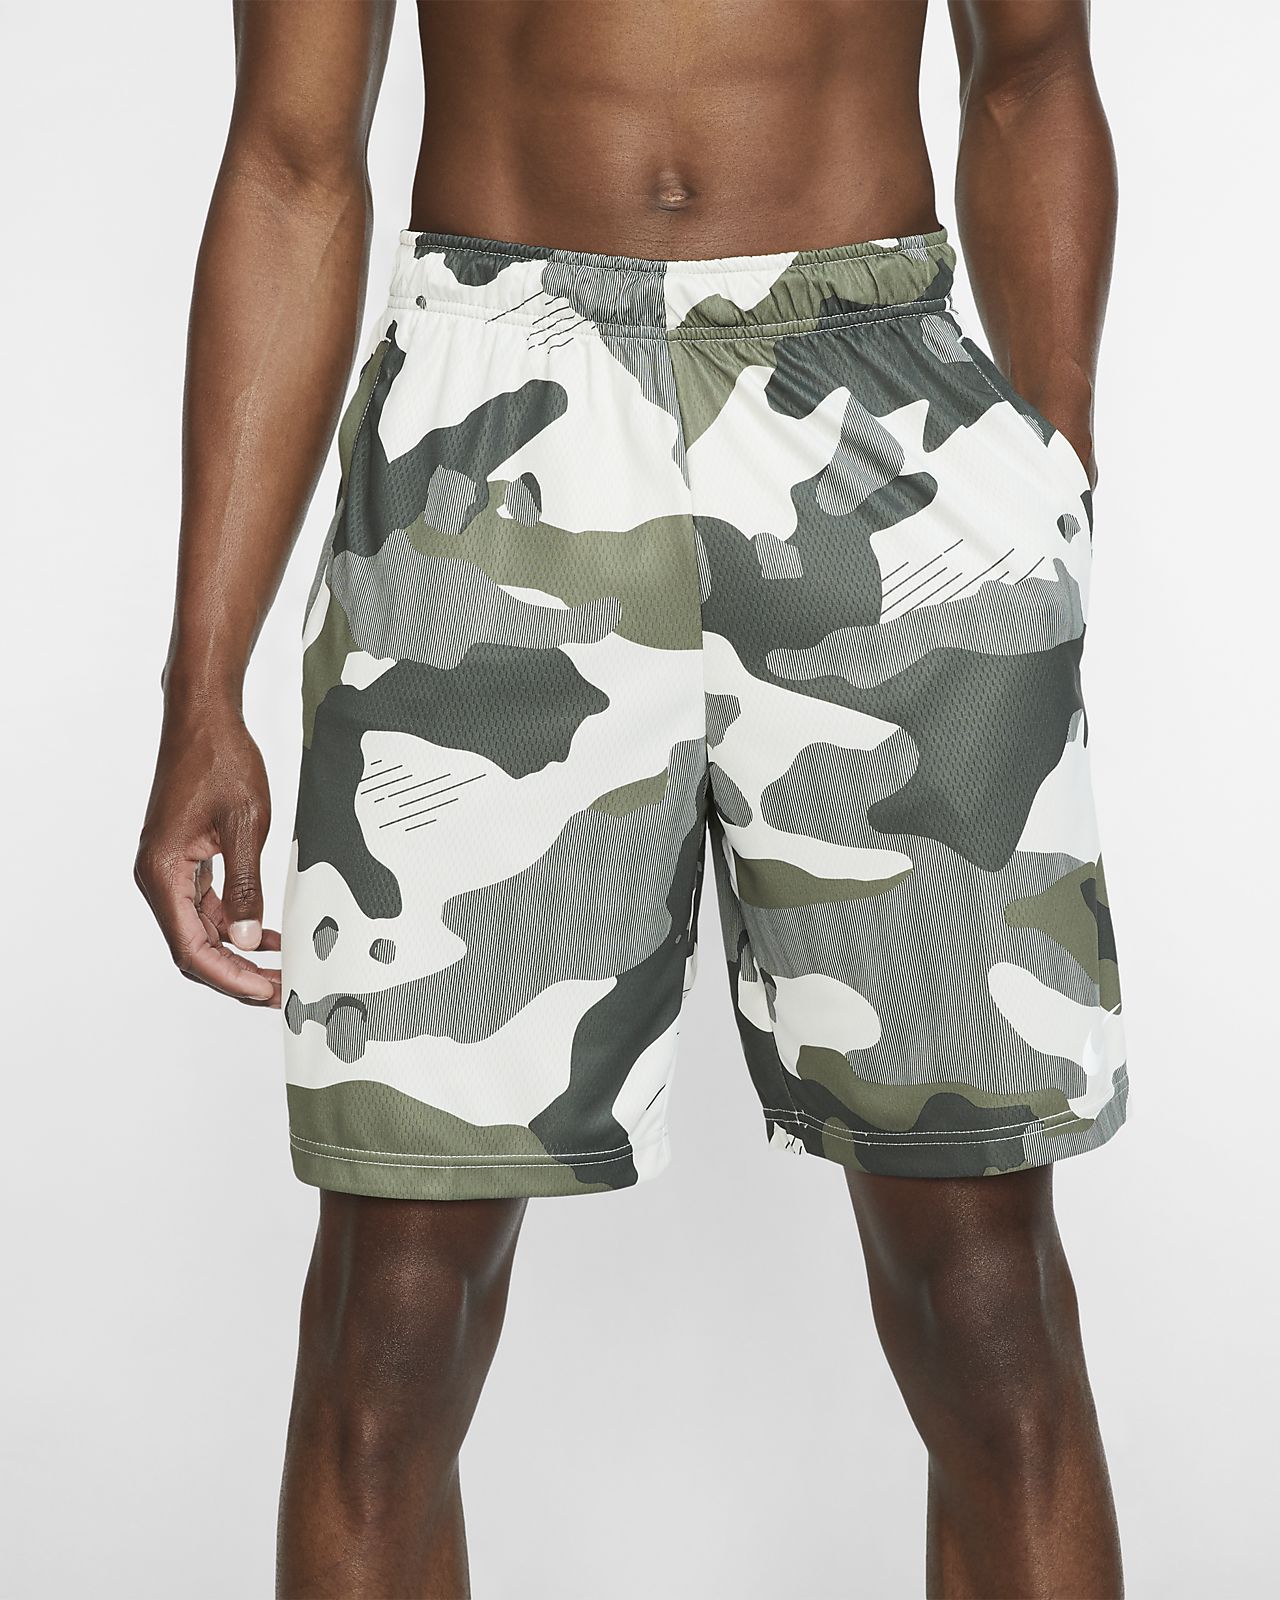 camouflage shorts nike cheap online